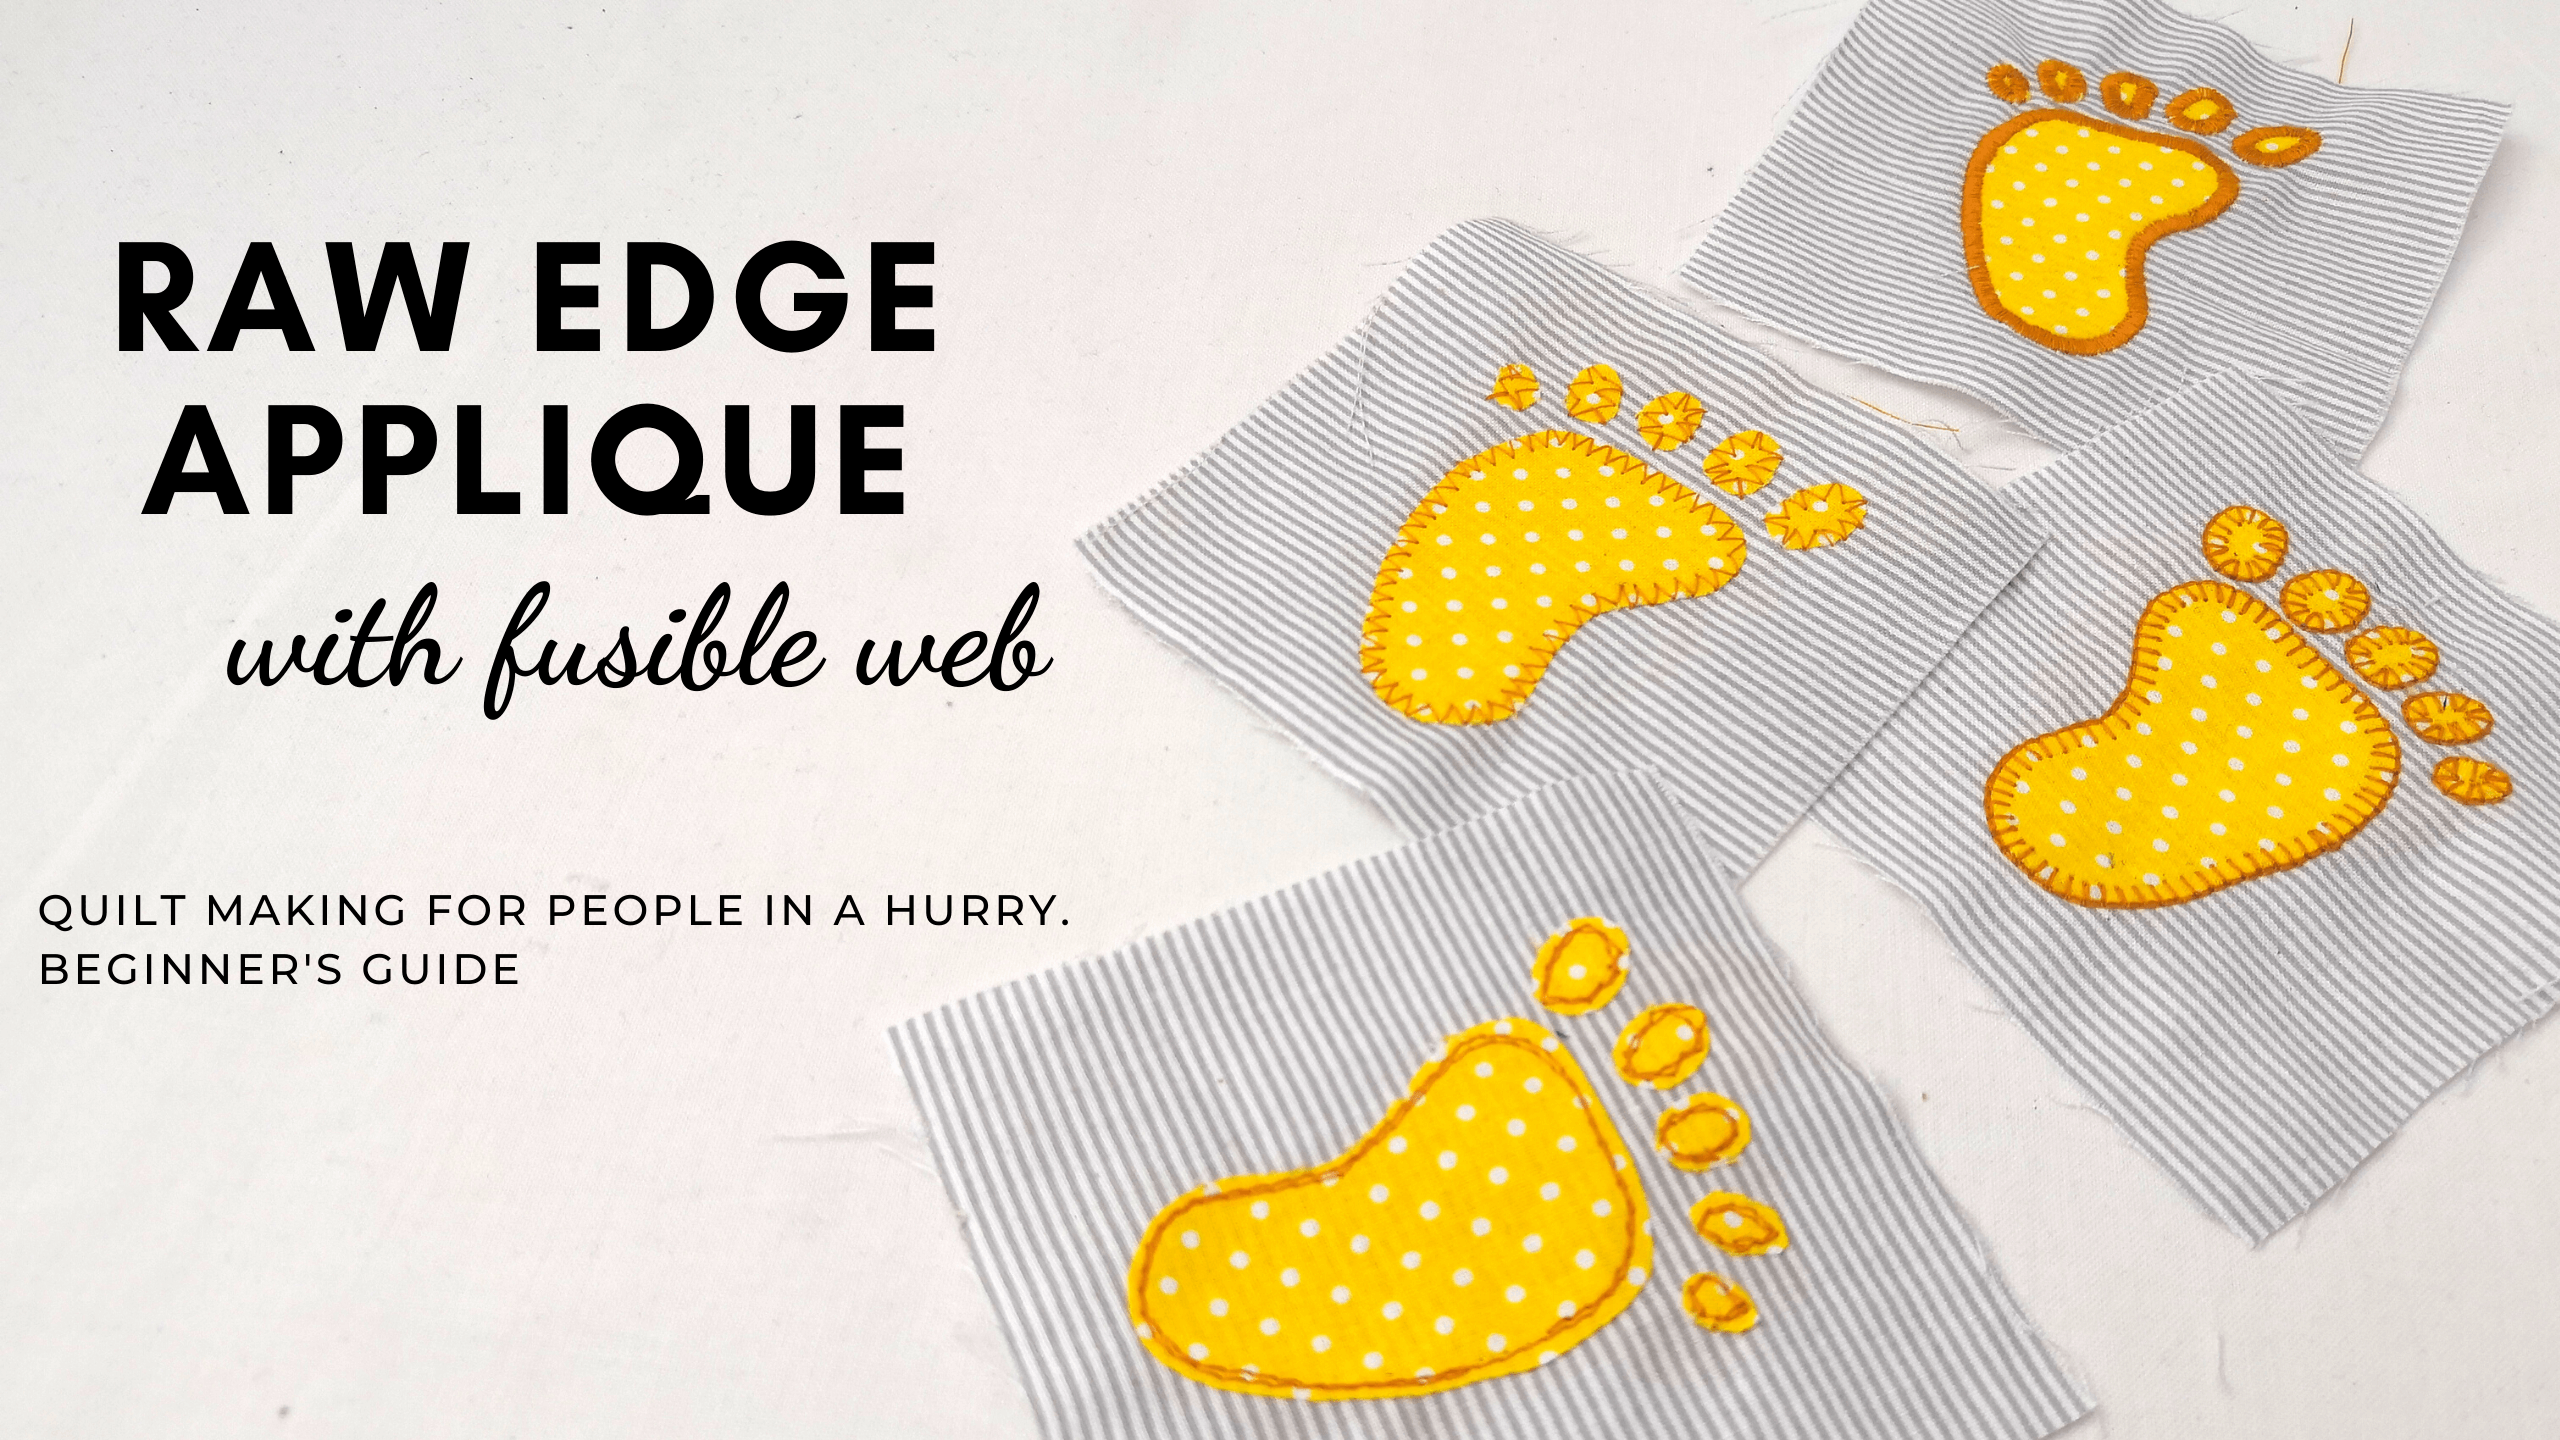 Raw Edge Appliqué: Ideas and Techniques, including Fusible - Create Whimsy